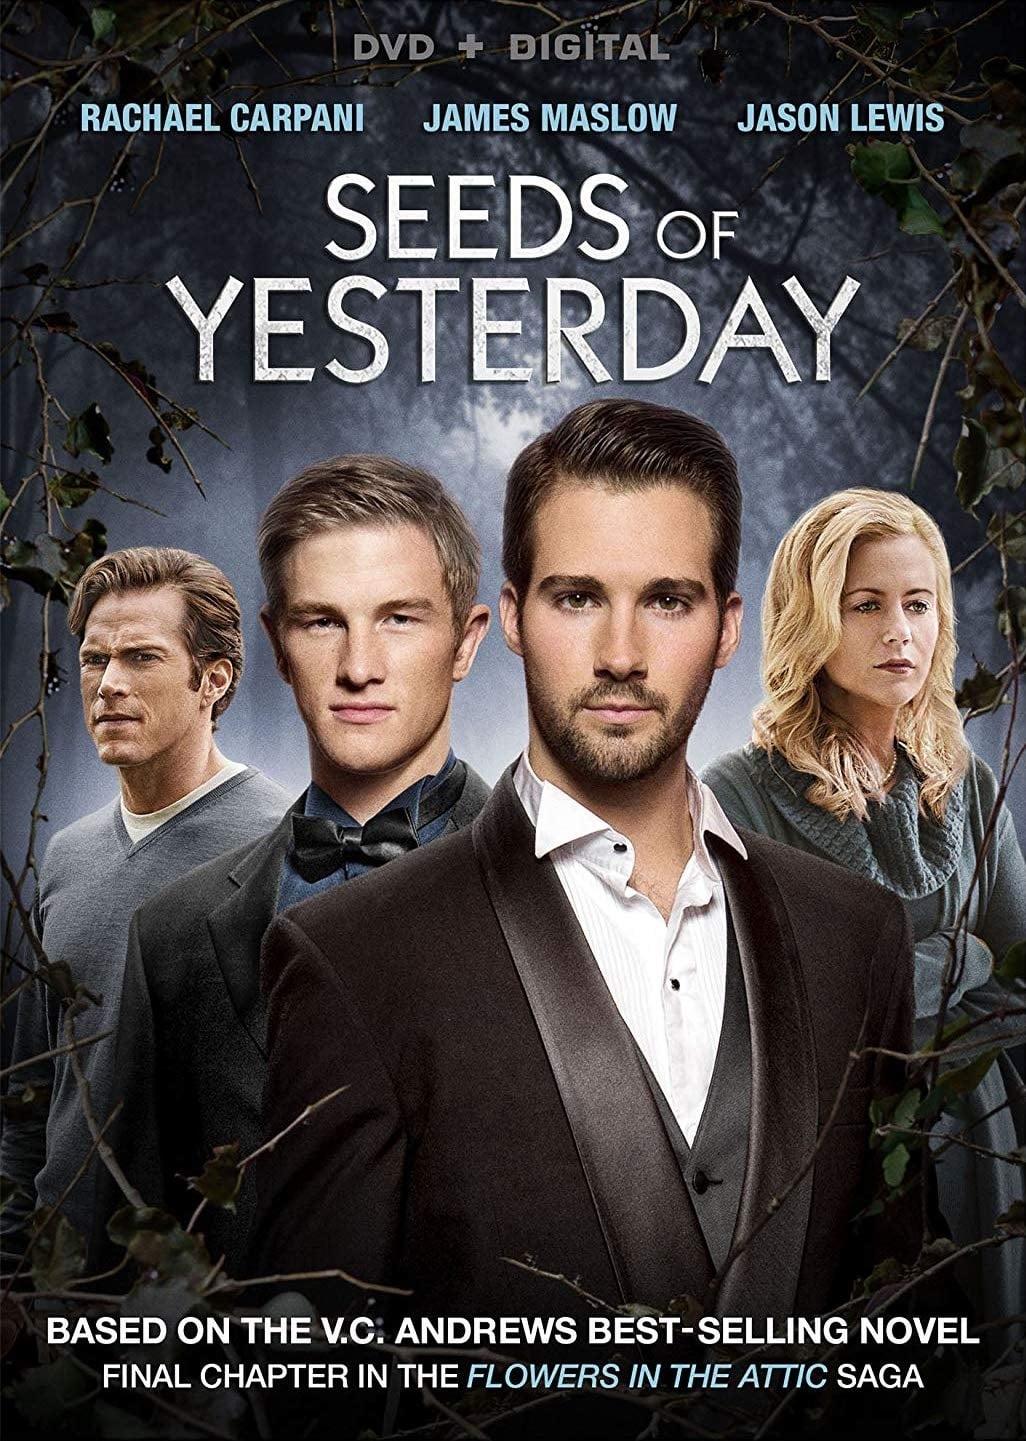 Seeds of Yesterday poster